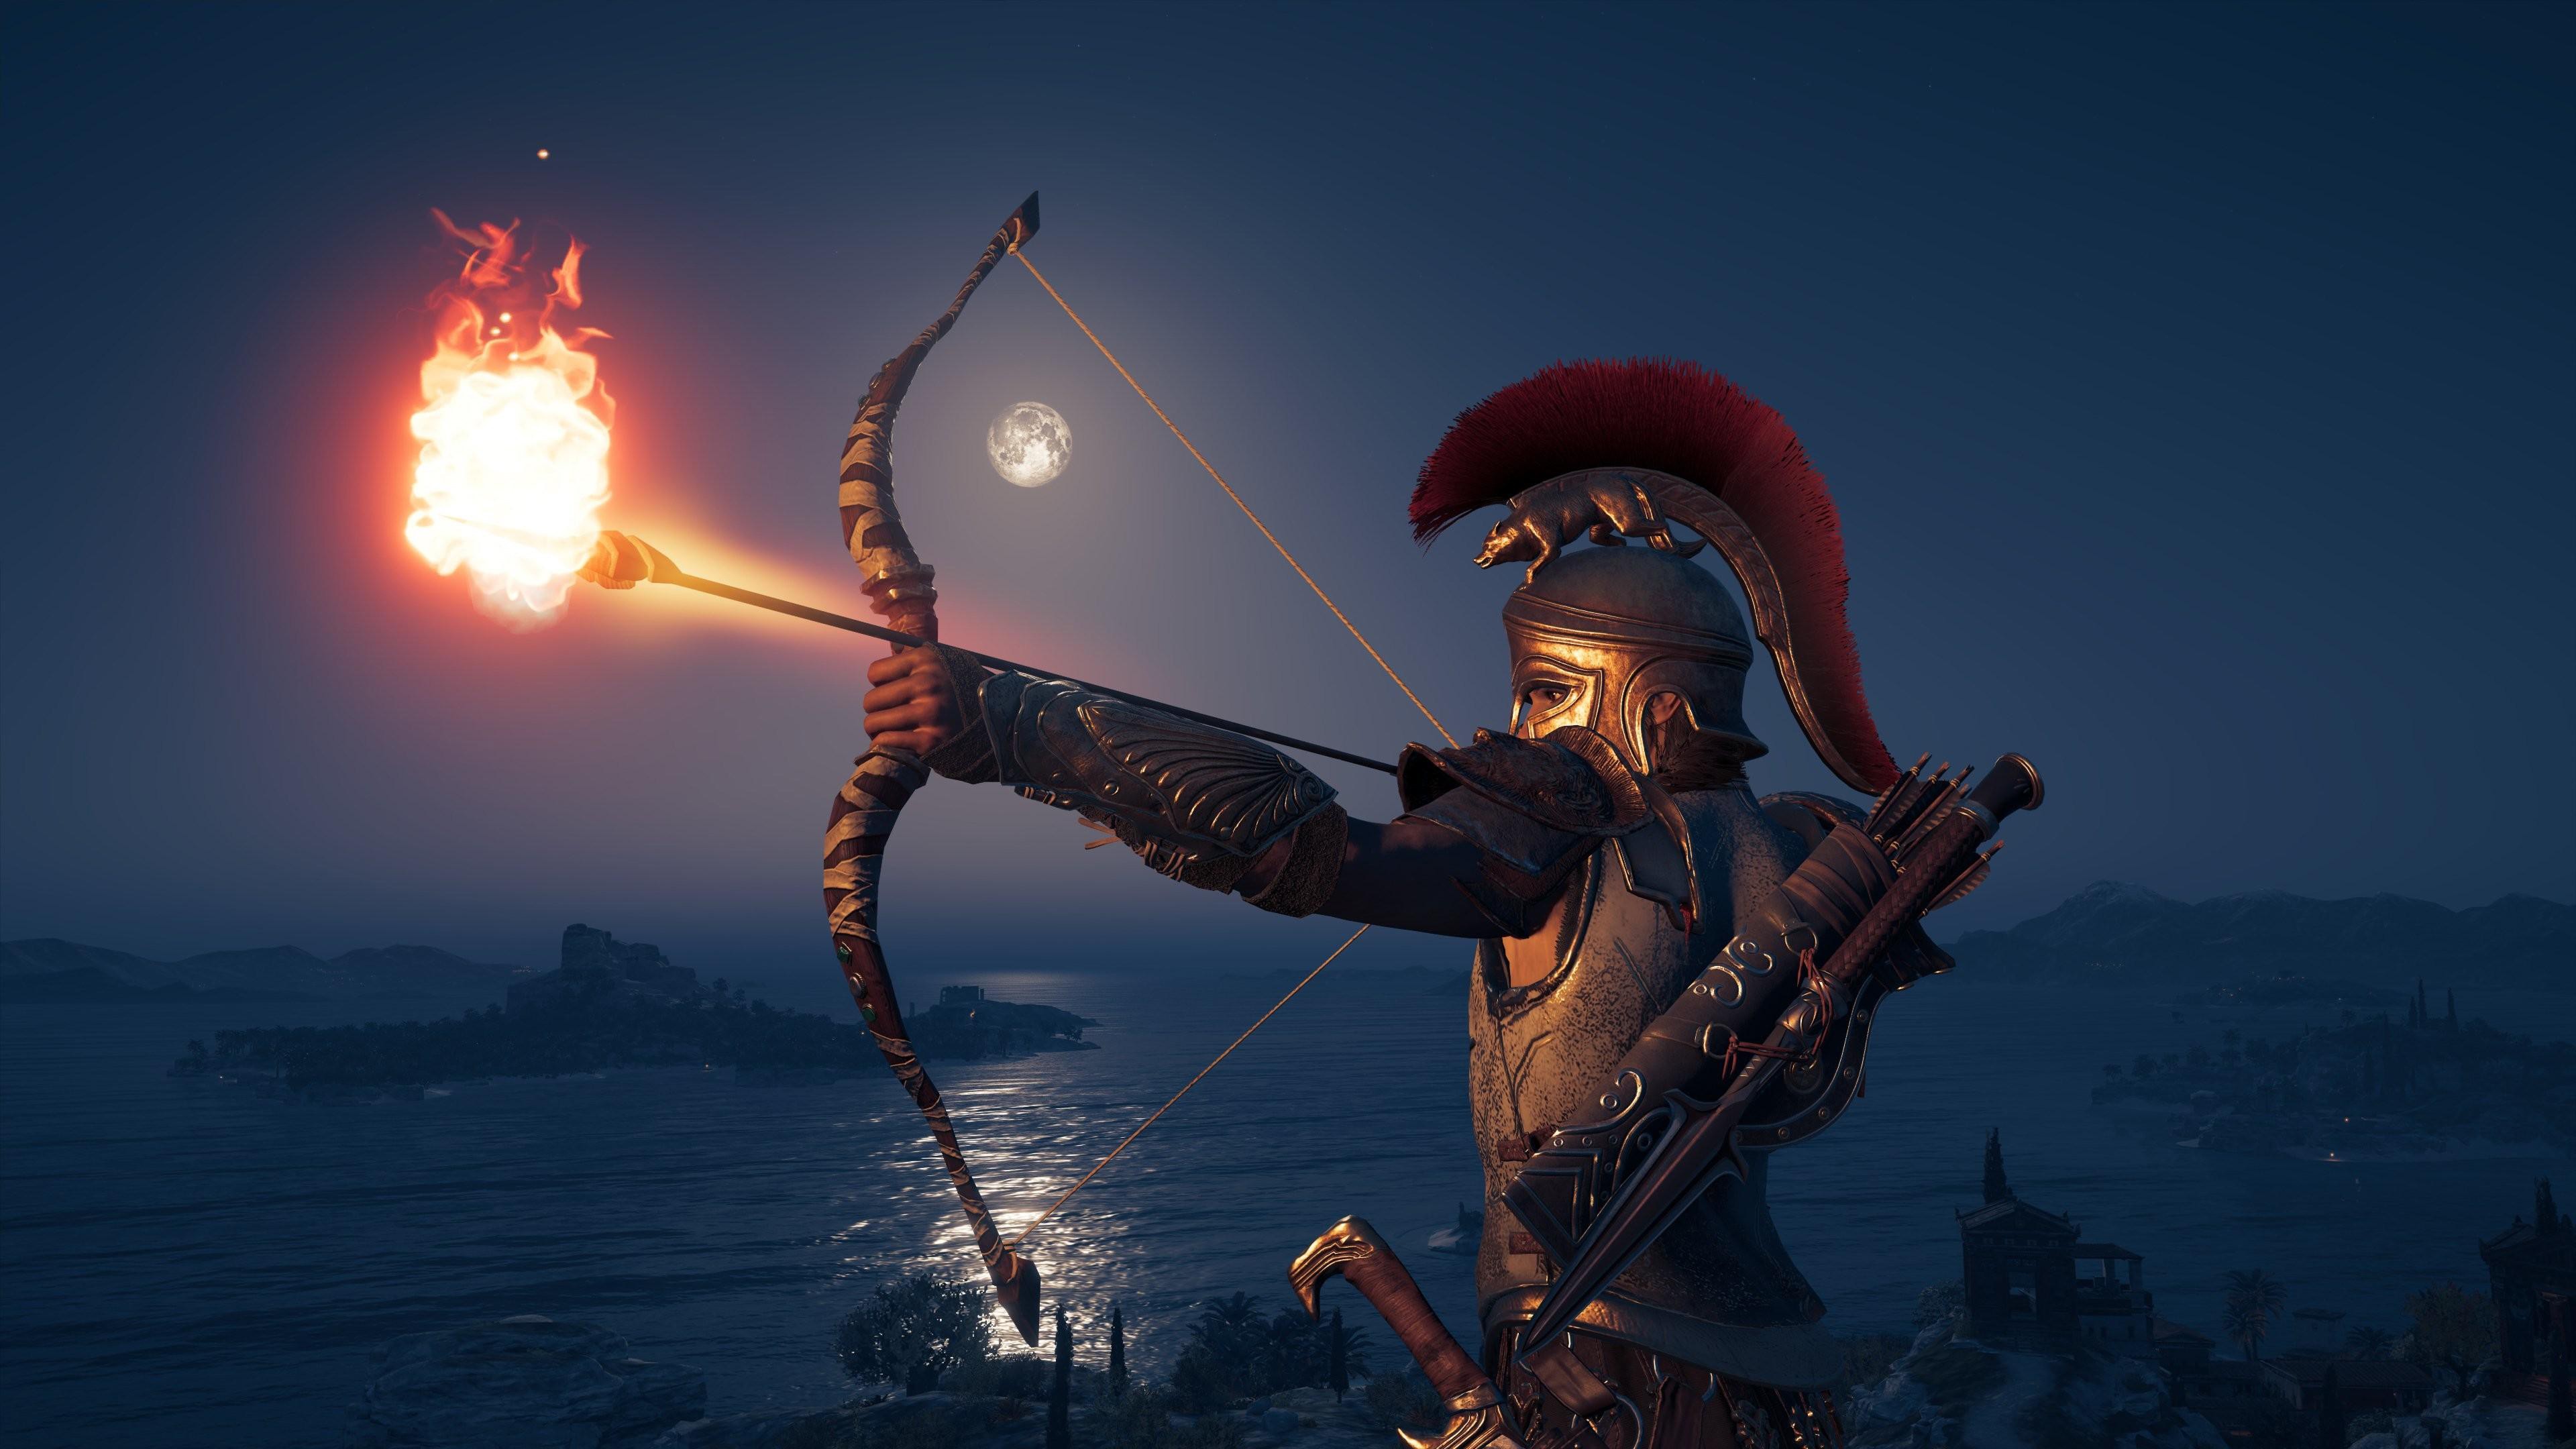 Bow and arrow firing wallpapers